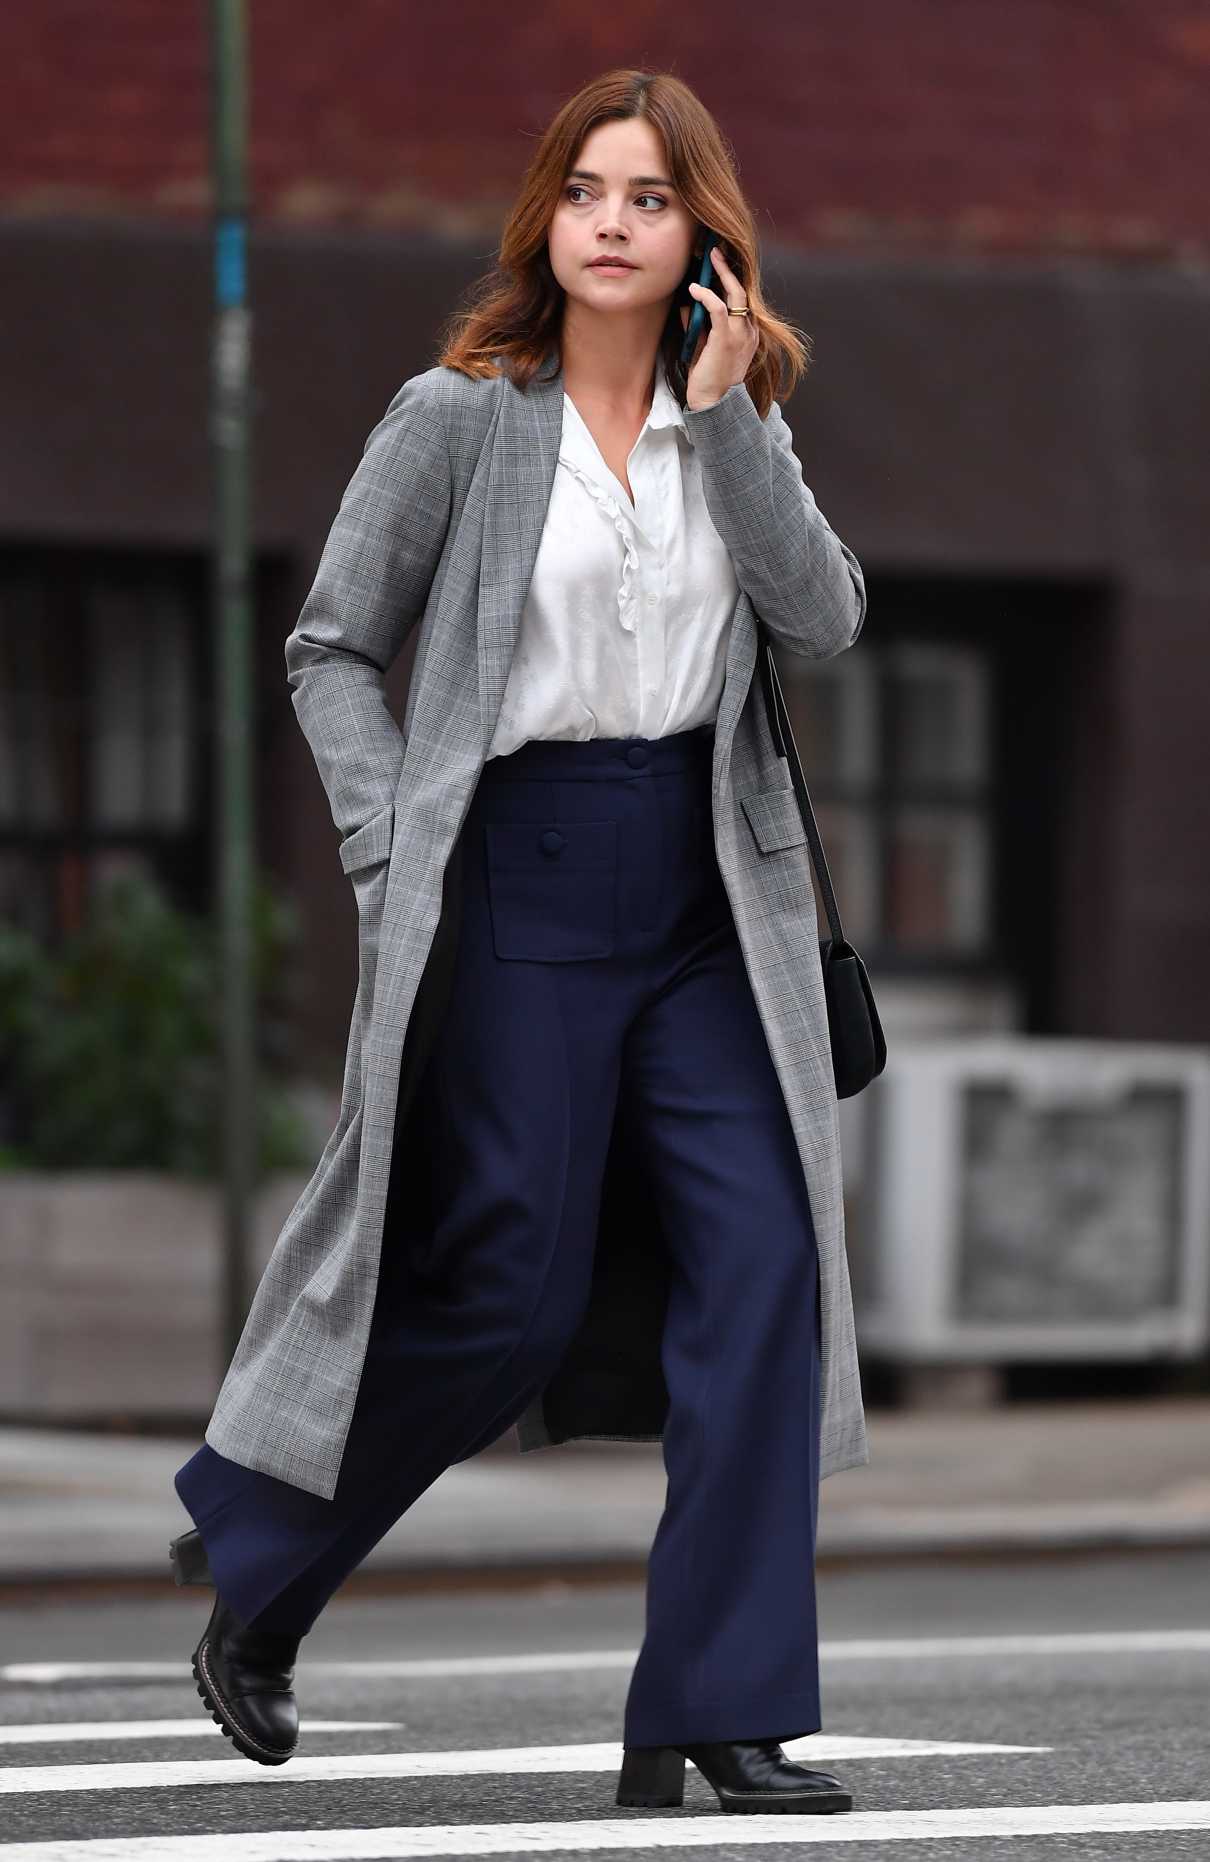 Jenna Coleman in a Grey Trench Coat